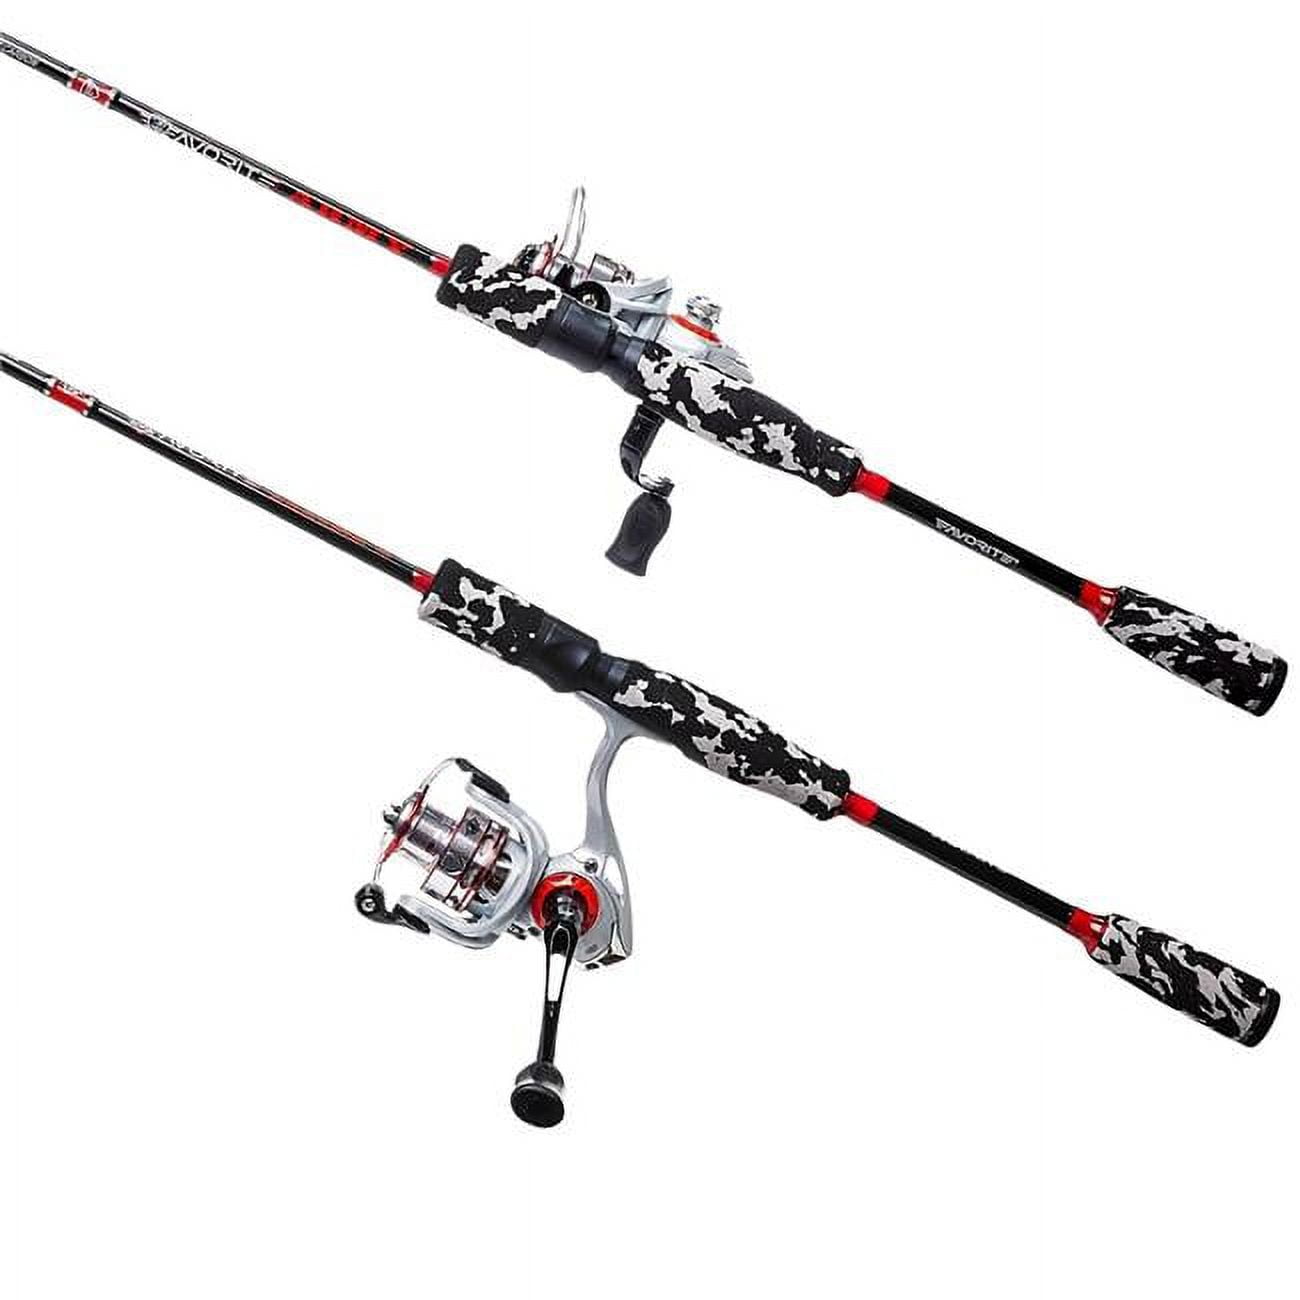 Shakespeare Tiger 7 Spinning Reel and Fishing Rod Combo 